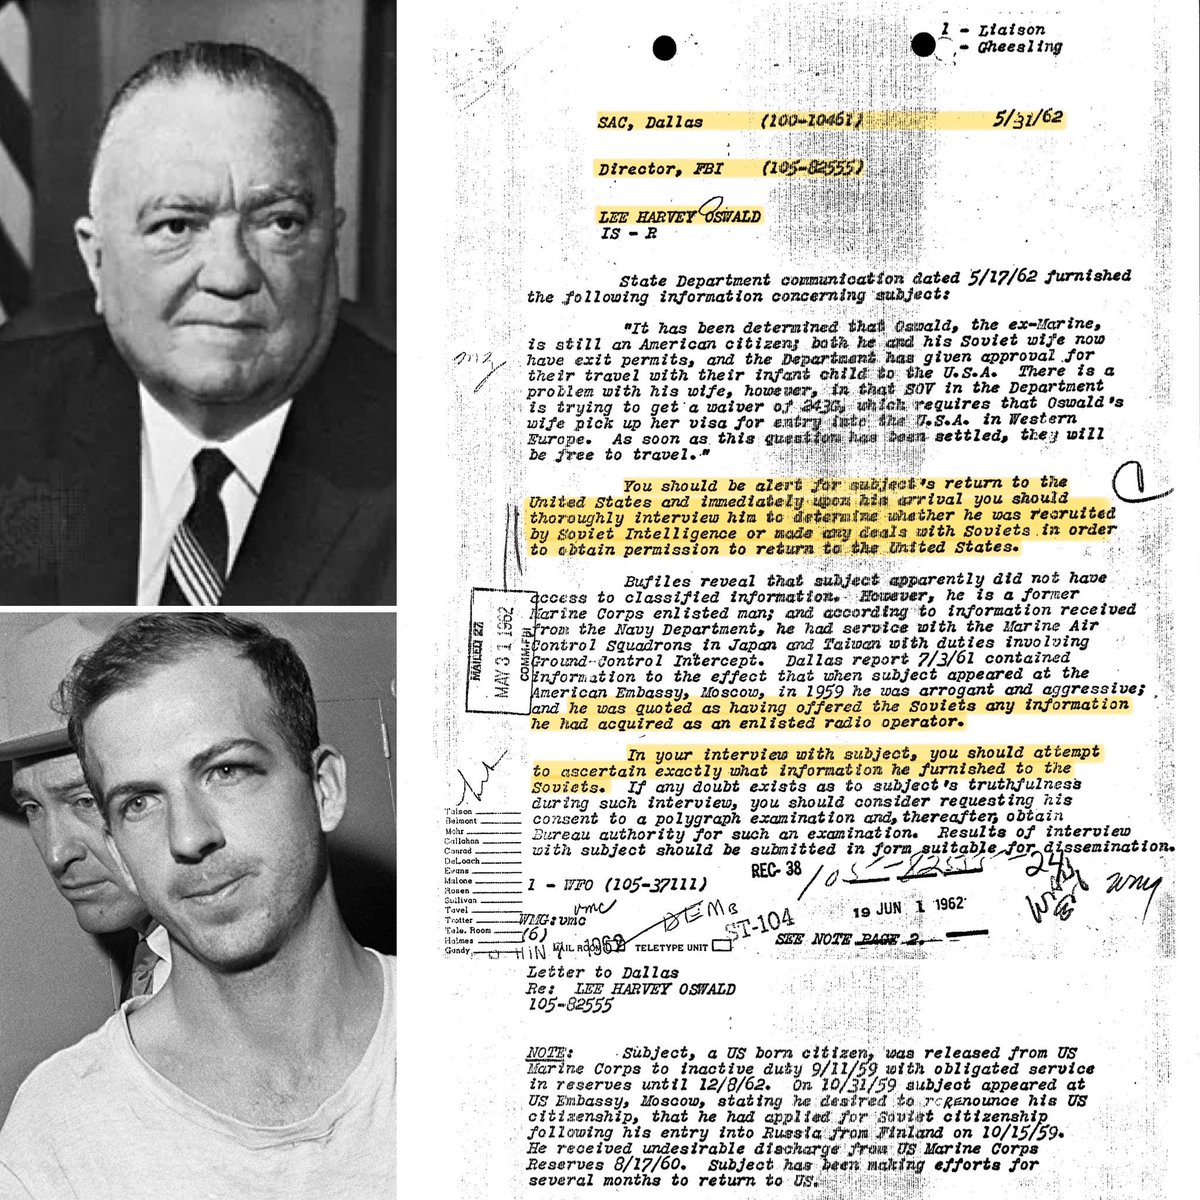 J. Edgar Hoover sends a memo on 5/31/62 to SAC Dallas with instructions for interviewing Oswald immediately upon his return from Russia: '𝙔𝙤𝙪 𝙨𝙝𝙤𝙪𝙡𝙙 𝙗𝙚 𝙖𝙡𝙚𝙧𝙩 𝙛𝙤𝙧 𝙨𝙪𝙗𝙟𝙚𝙘𝙩'𝙨 𝙧𝙚𝙩𝙪𝙧𝙣 𝙩𝙤 𝙩𝙝𝙚 𝙐𝙣𝙞𝙩𝙚𝙙 𝙎𝙩𝙖𝙩𝙚𝙨 𝙖𝙣𝙙 𝙞𝙢𝙢𝙚𝙙𝙞𝙖𝙩𝙚𝙡𝙮